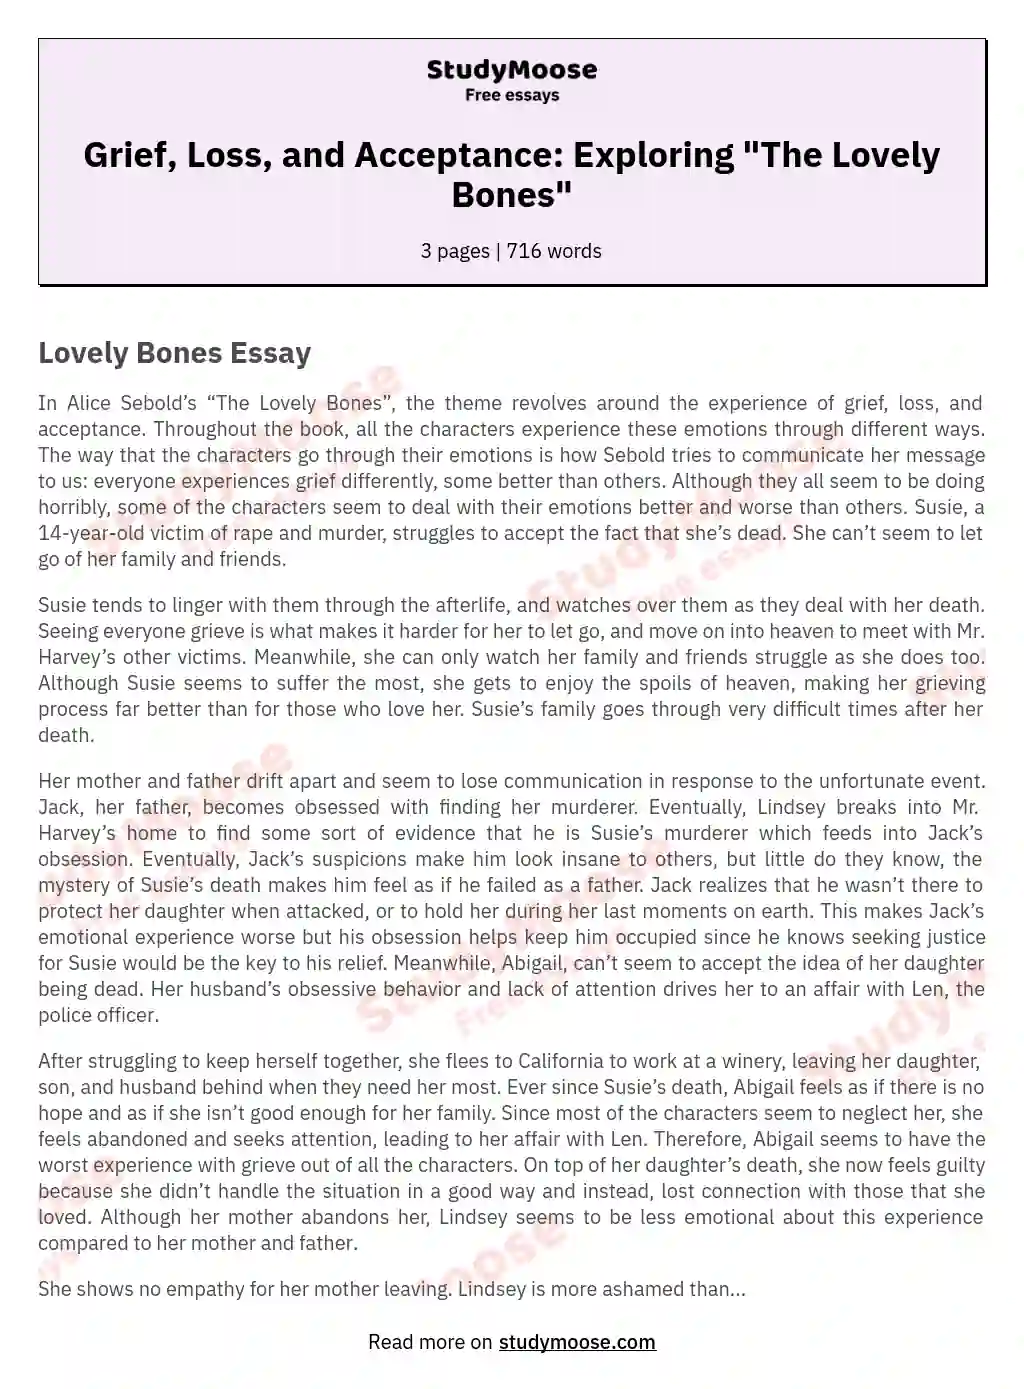 Grief, Loss, and Acceptance: Exploring "The Lovely Bones" essay